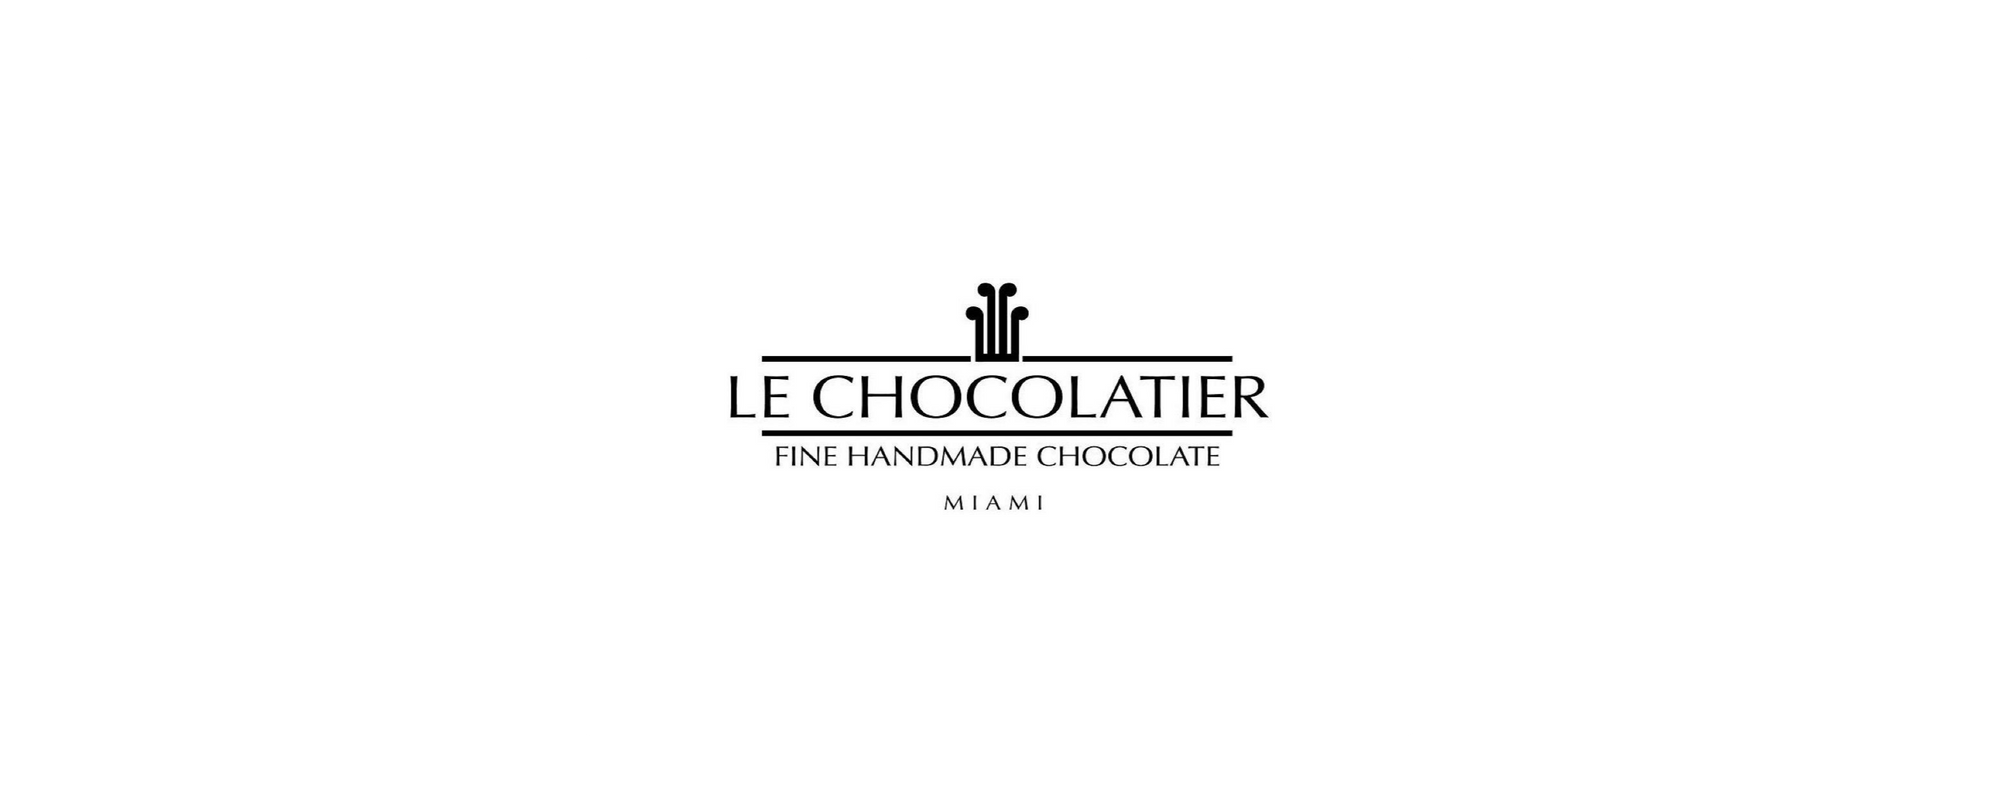 Here to Cater to Your Chocolate Needs - Joseph Marmor